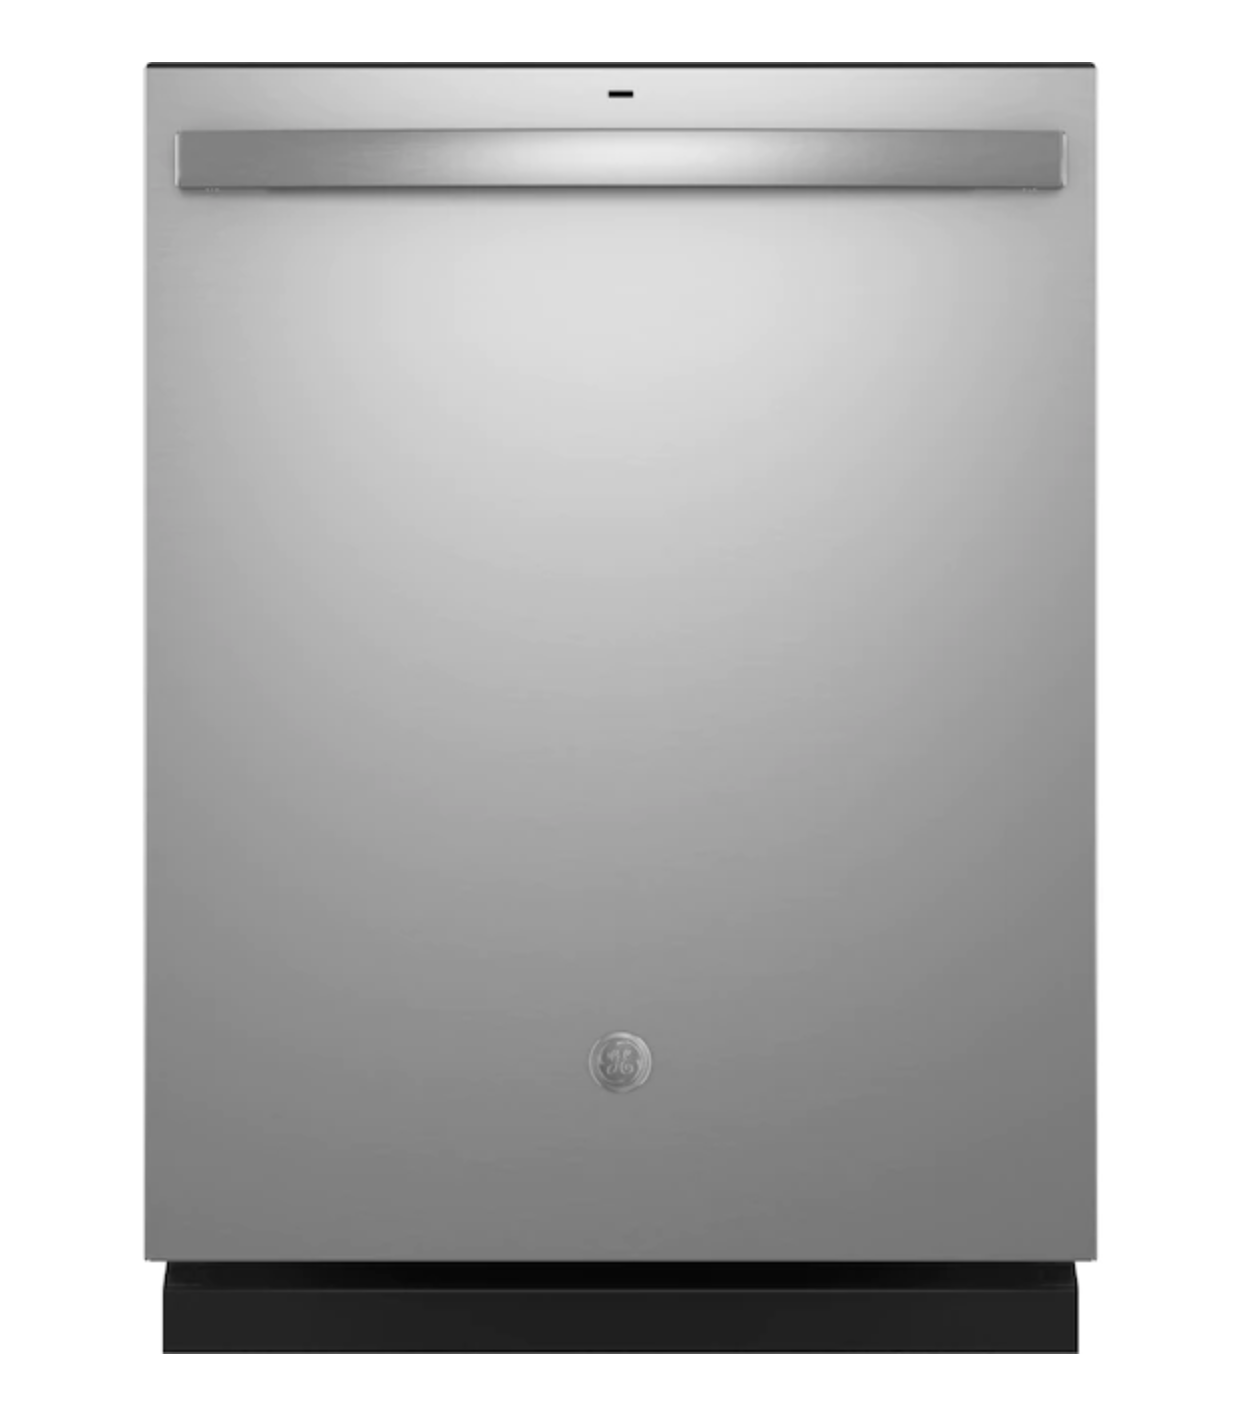 GE Top Control with Plastic Interior Dishwasher with Sanitize Cycle &amp; Dry Boost - Stainless Steel - 52dba Model GDT550PYRFS MSRP $729